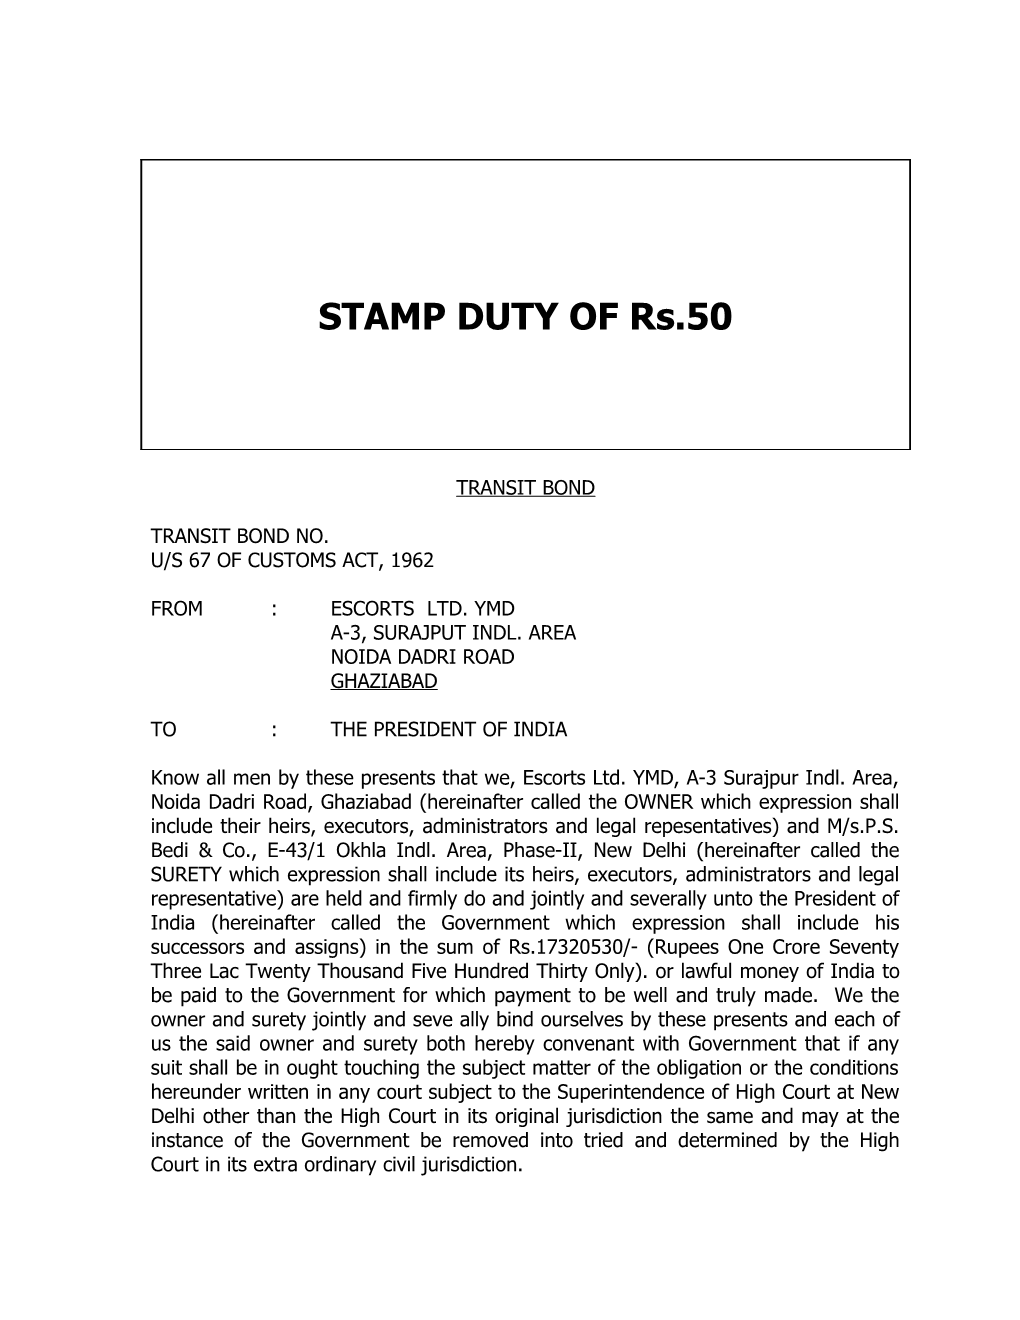 STAMP DUTY of Rs